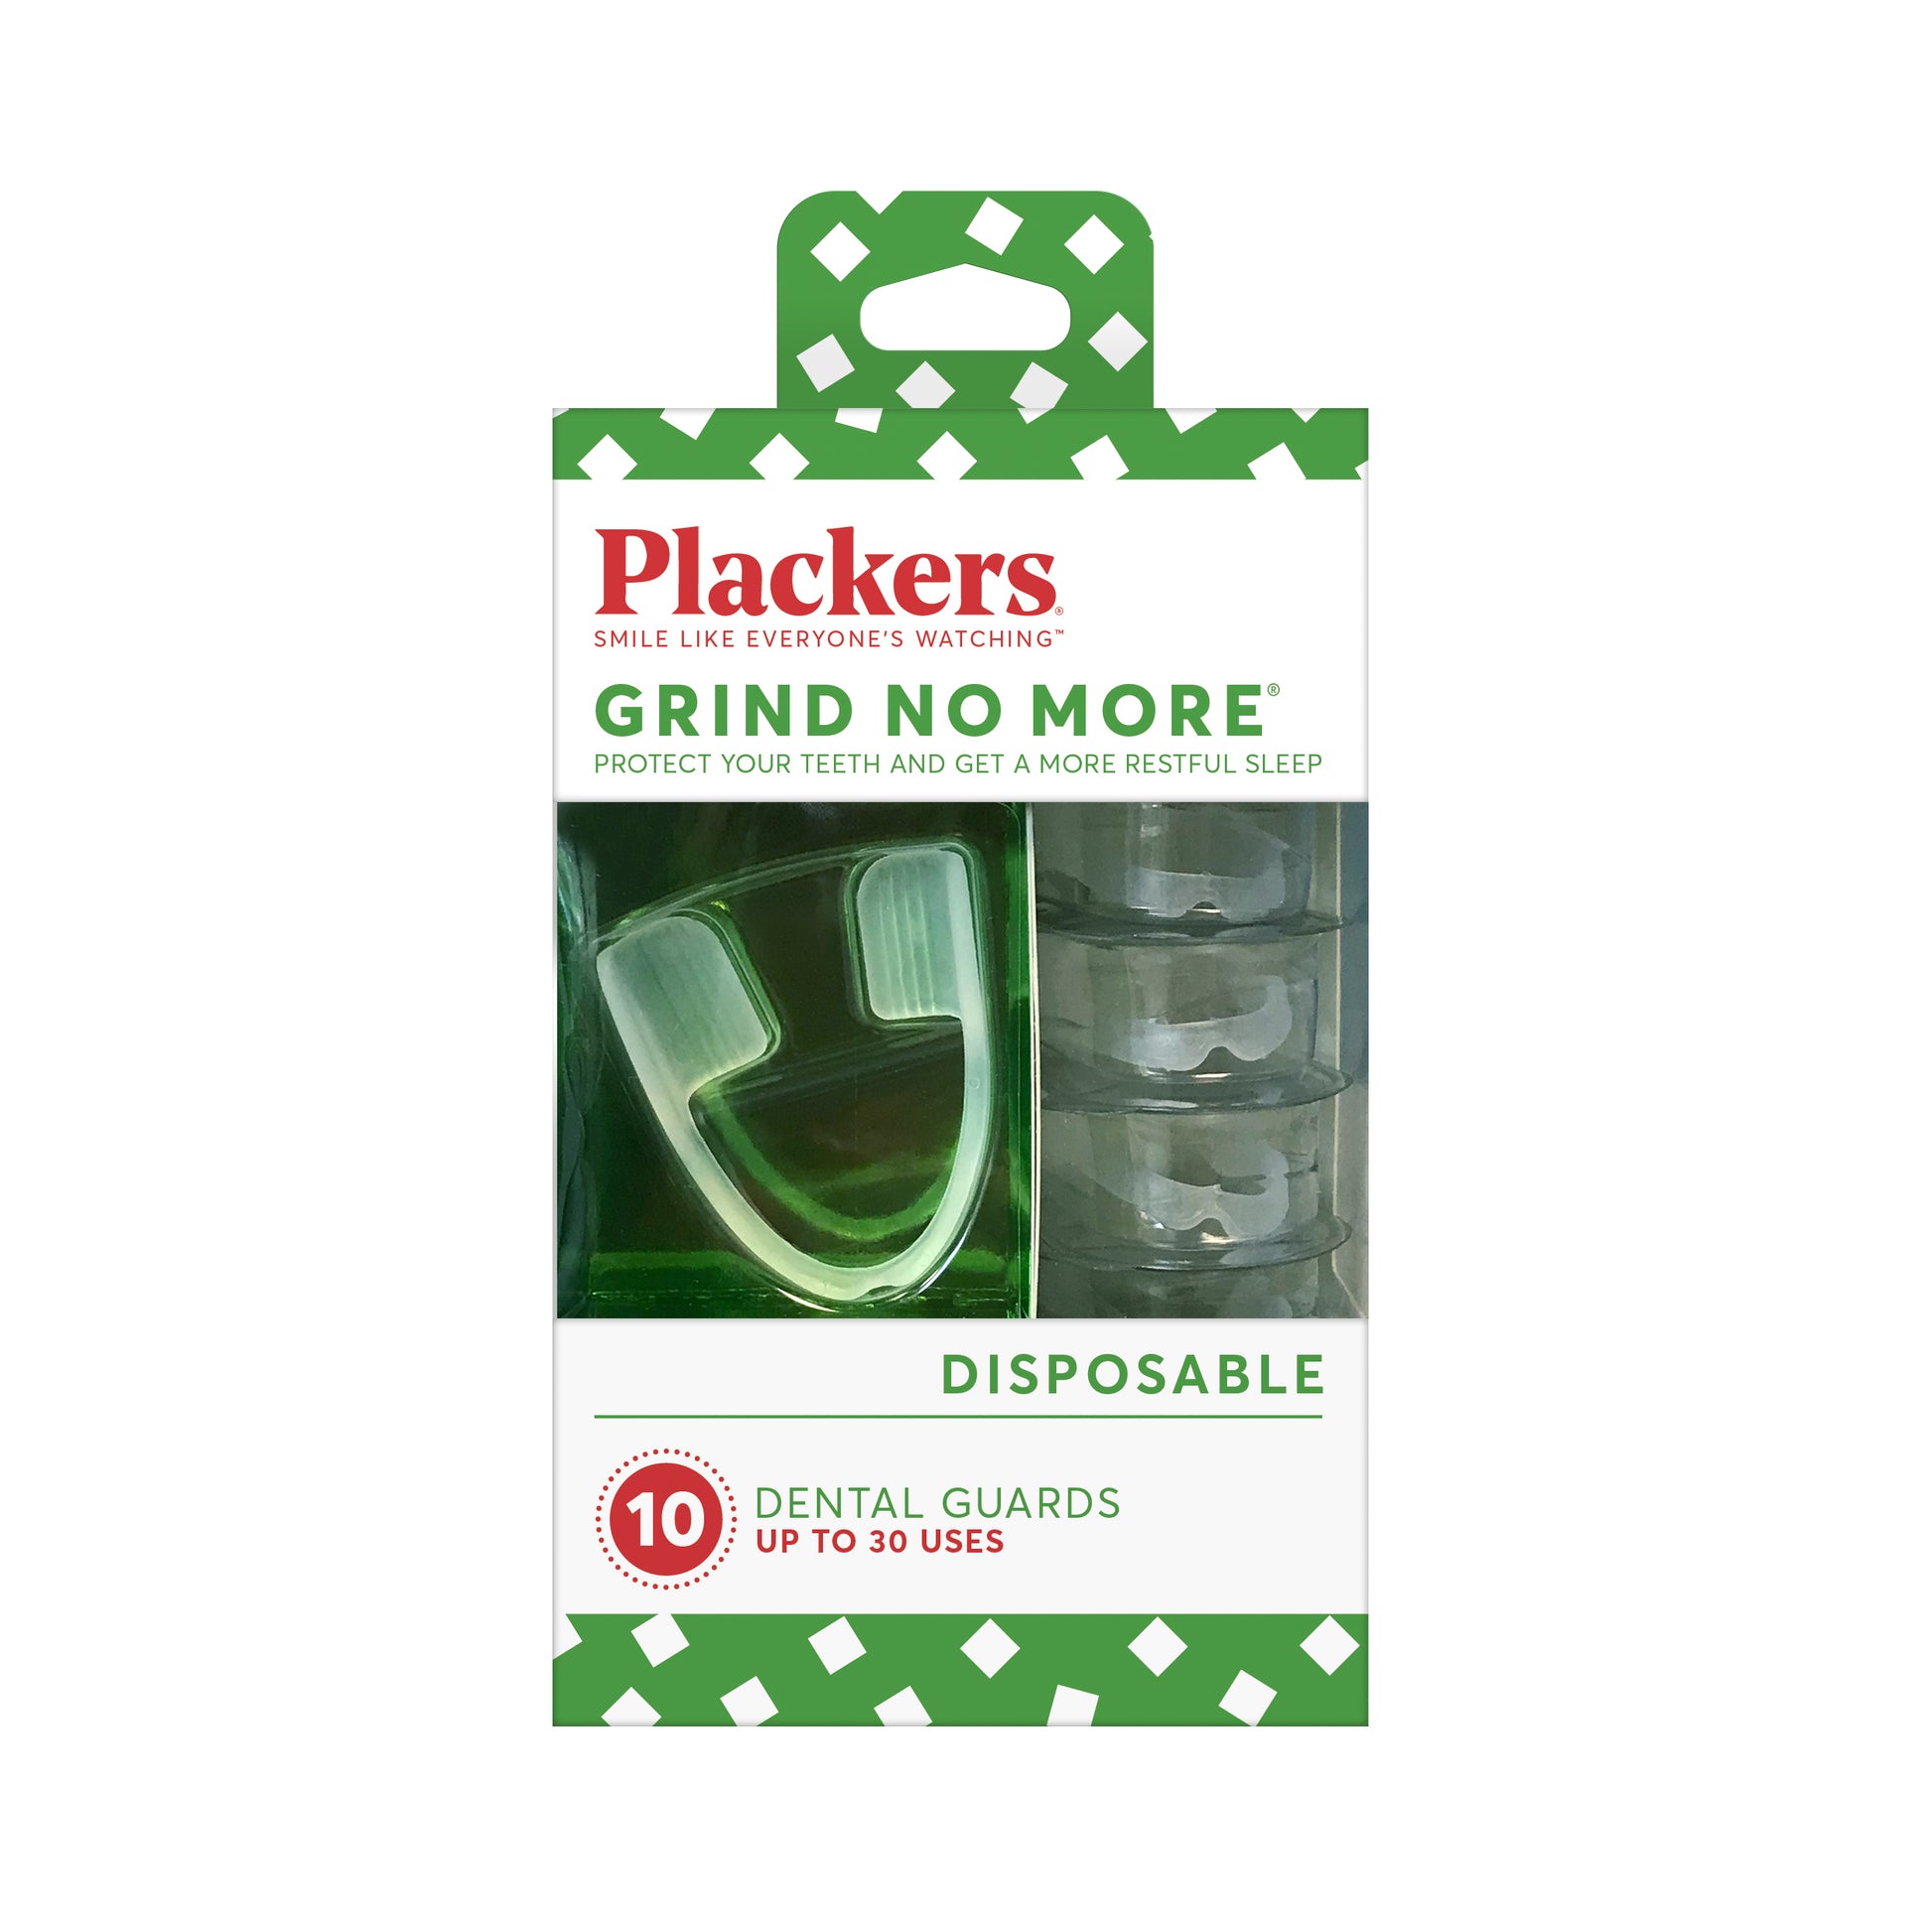 10 pack of Plackers Grind No More Night Guard. Protect your teeth and get a more restful sleep. Up to 30 uses